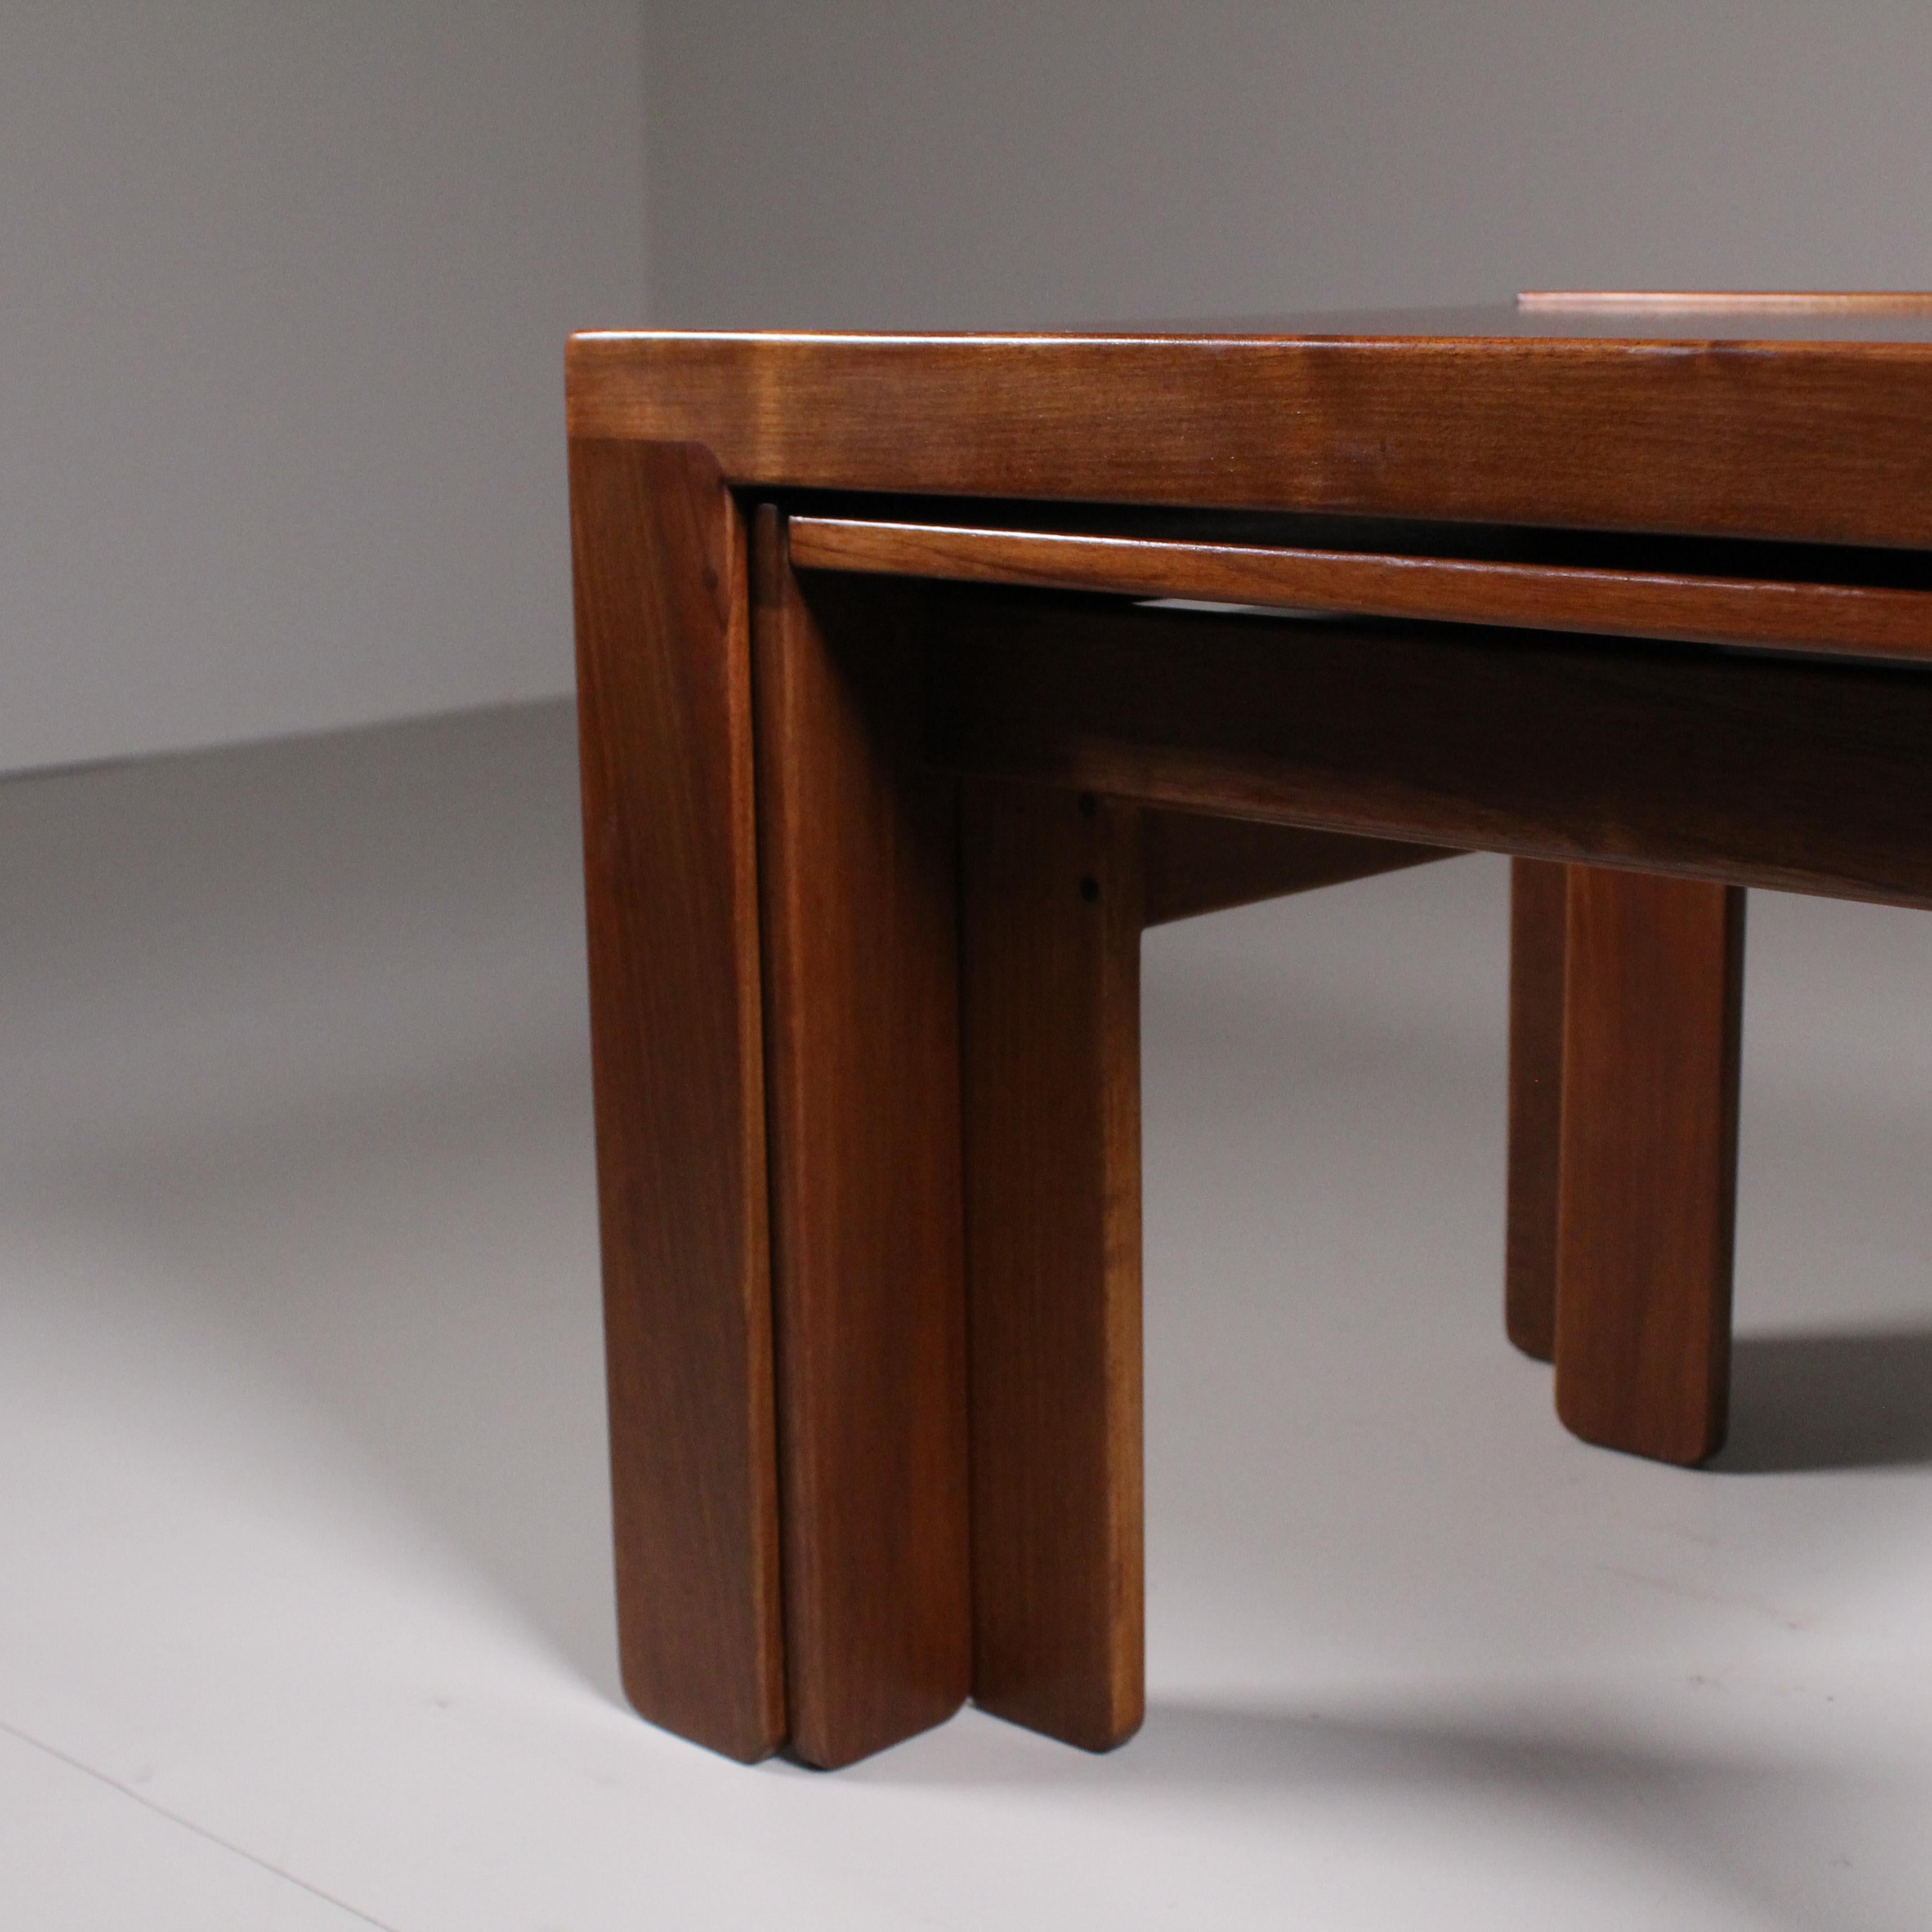 Small tables model 777, Afra and Tobia Scarpa, 1965 Circa For Sale 1